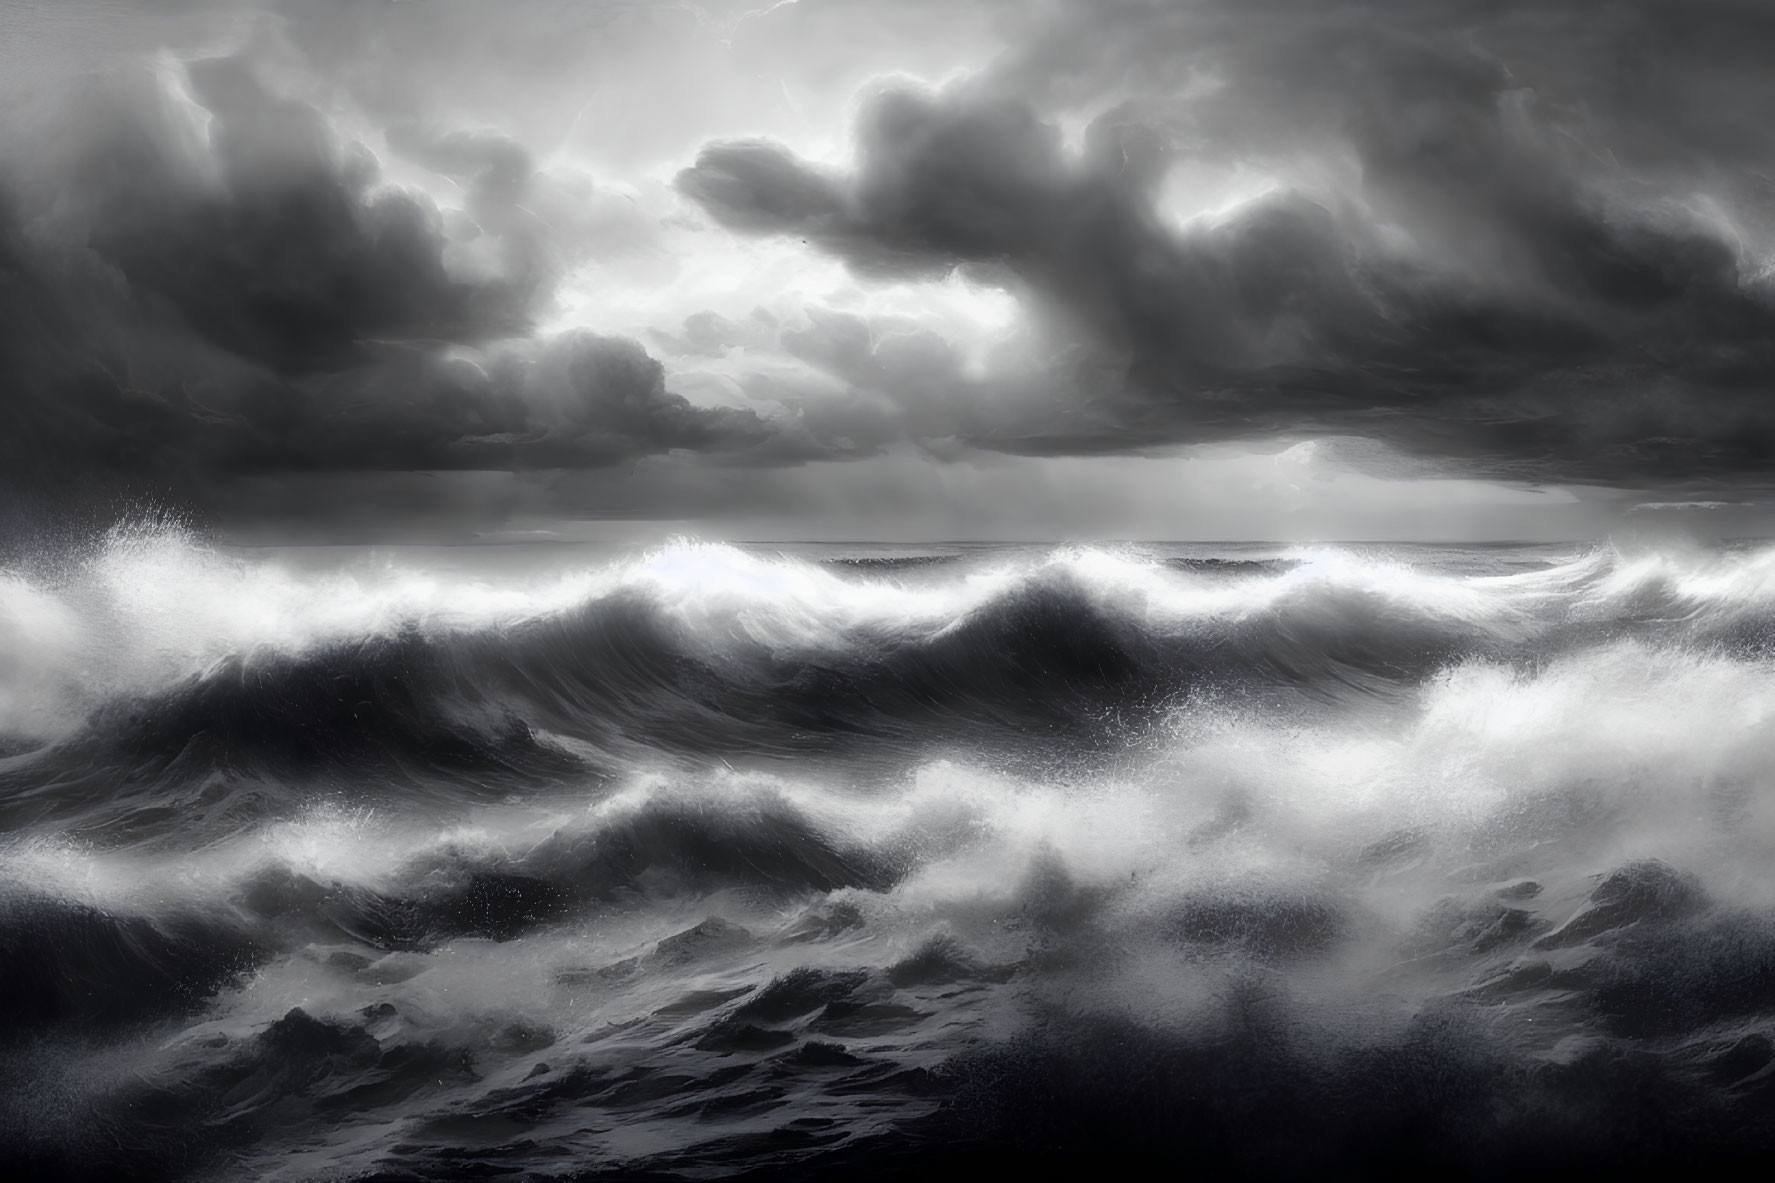 Stormy Seascape with Dark Clouds and Foamy Waves